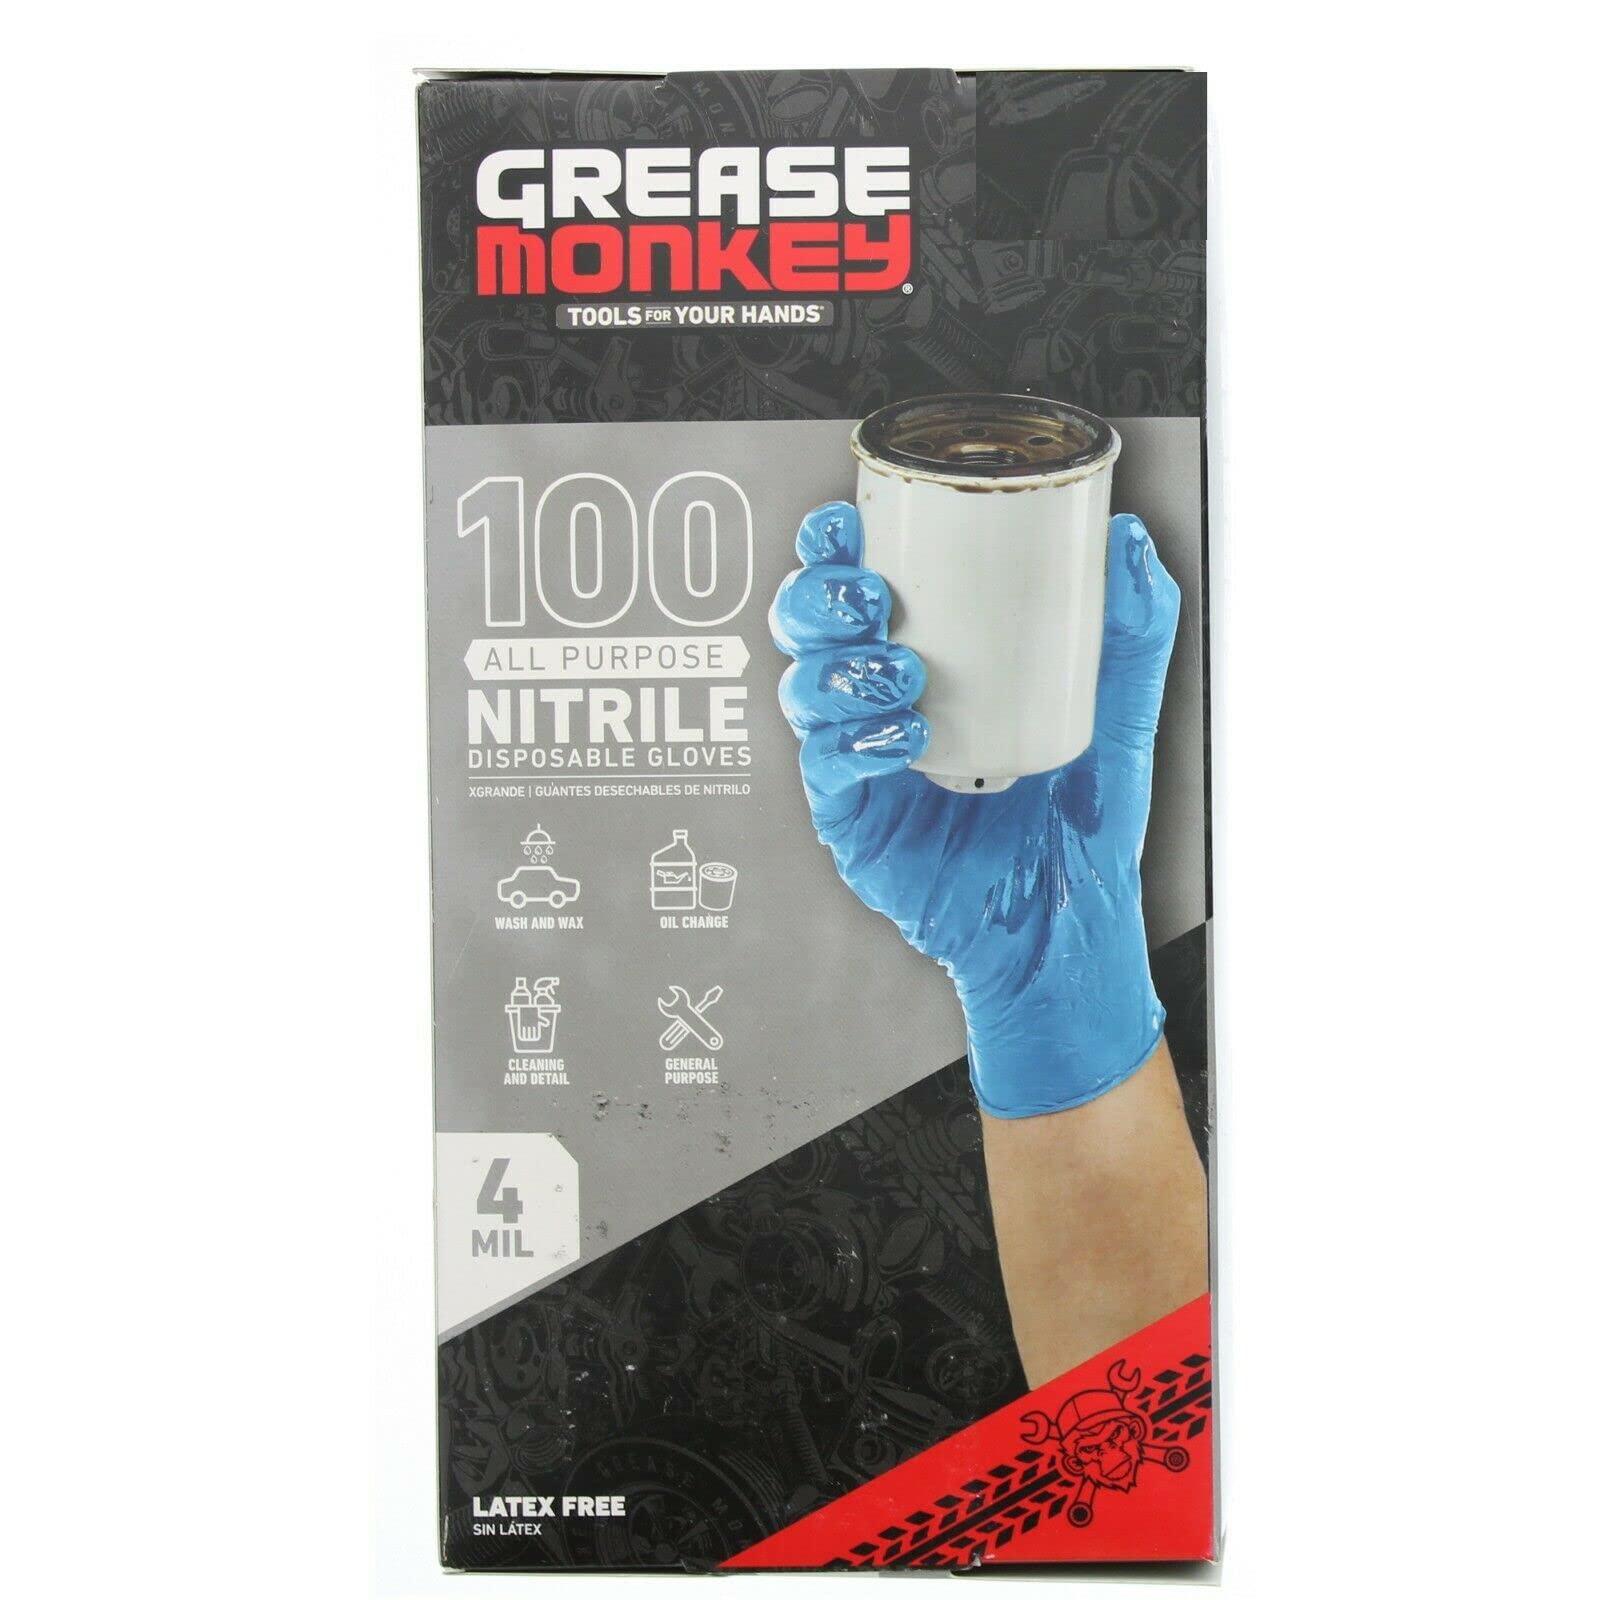 Need Durable Hand Protection for Auto Work. Discover Why Grease Monkey Gloves Are the Go-To Choice